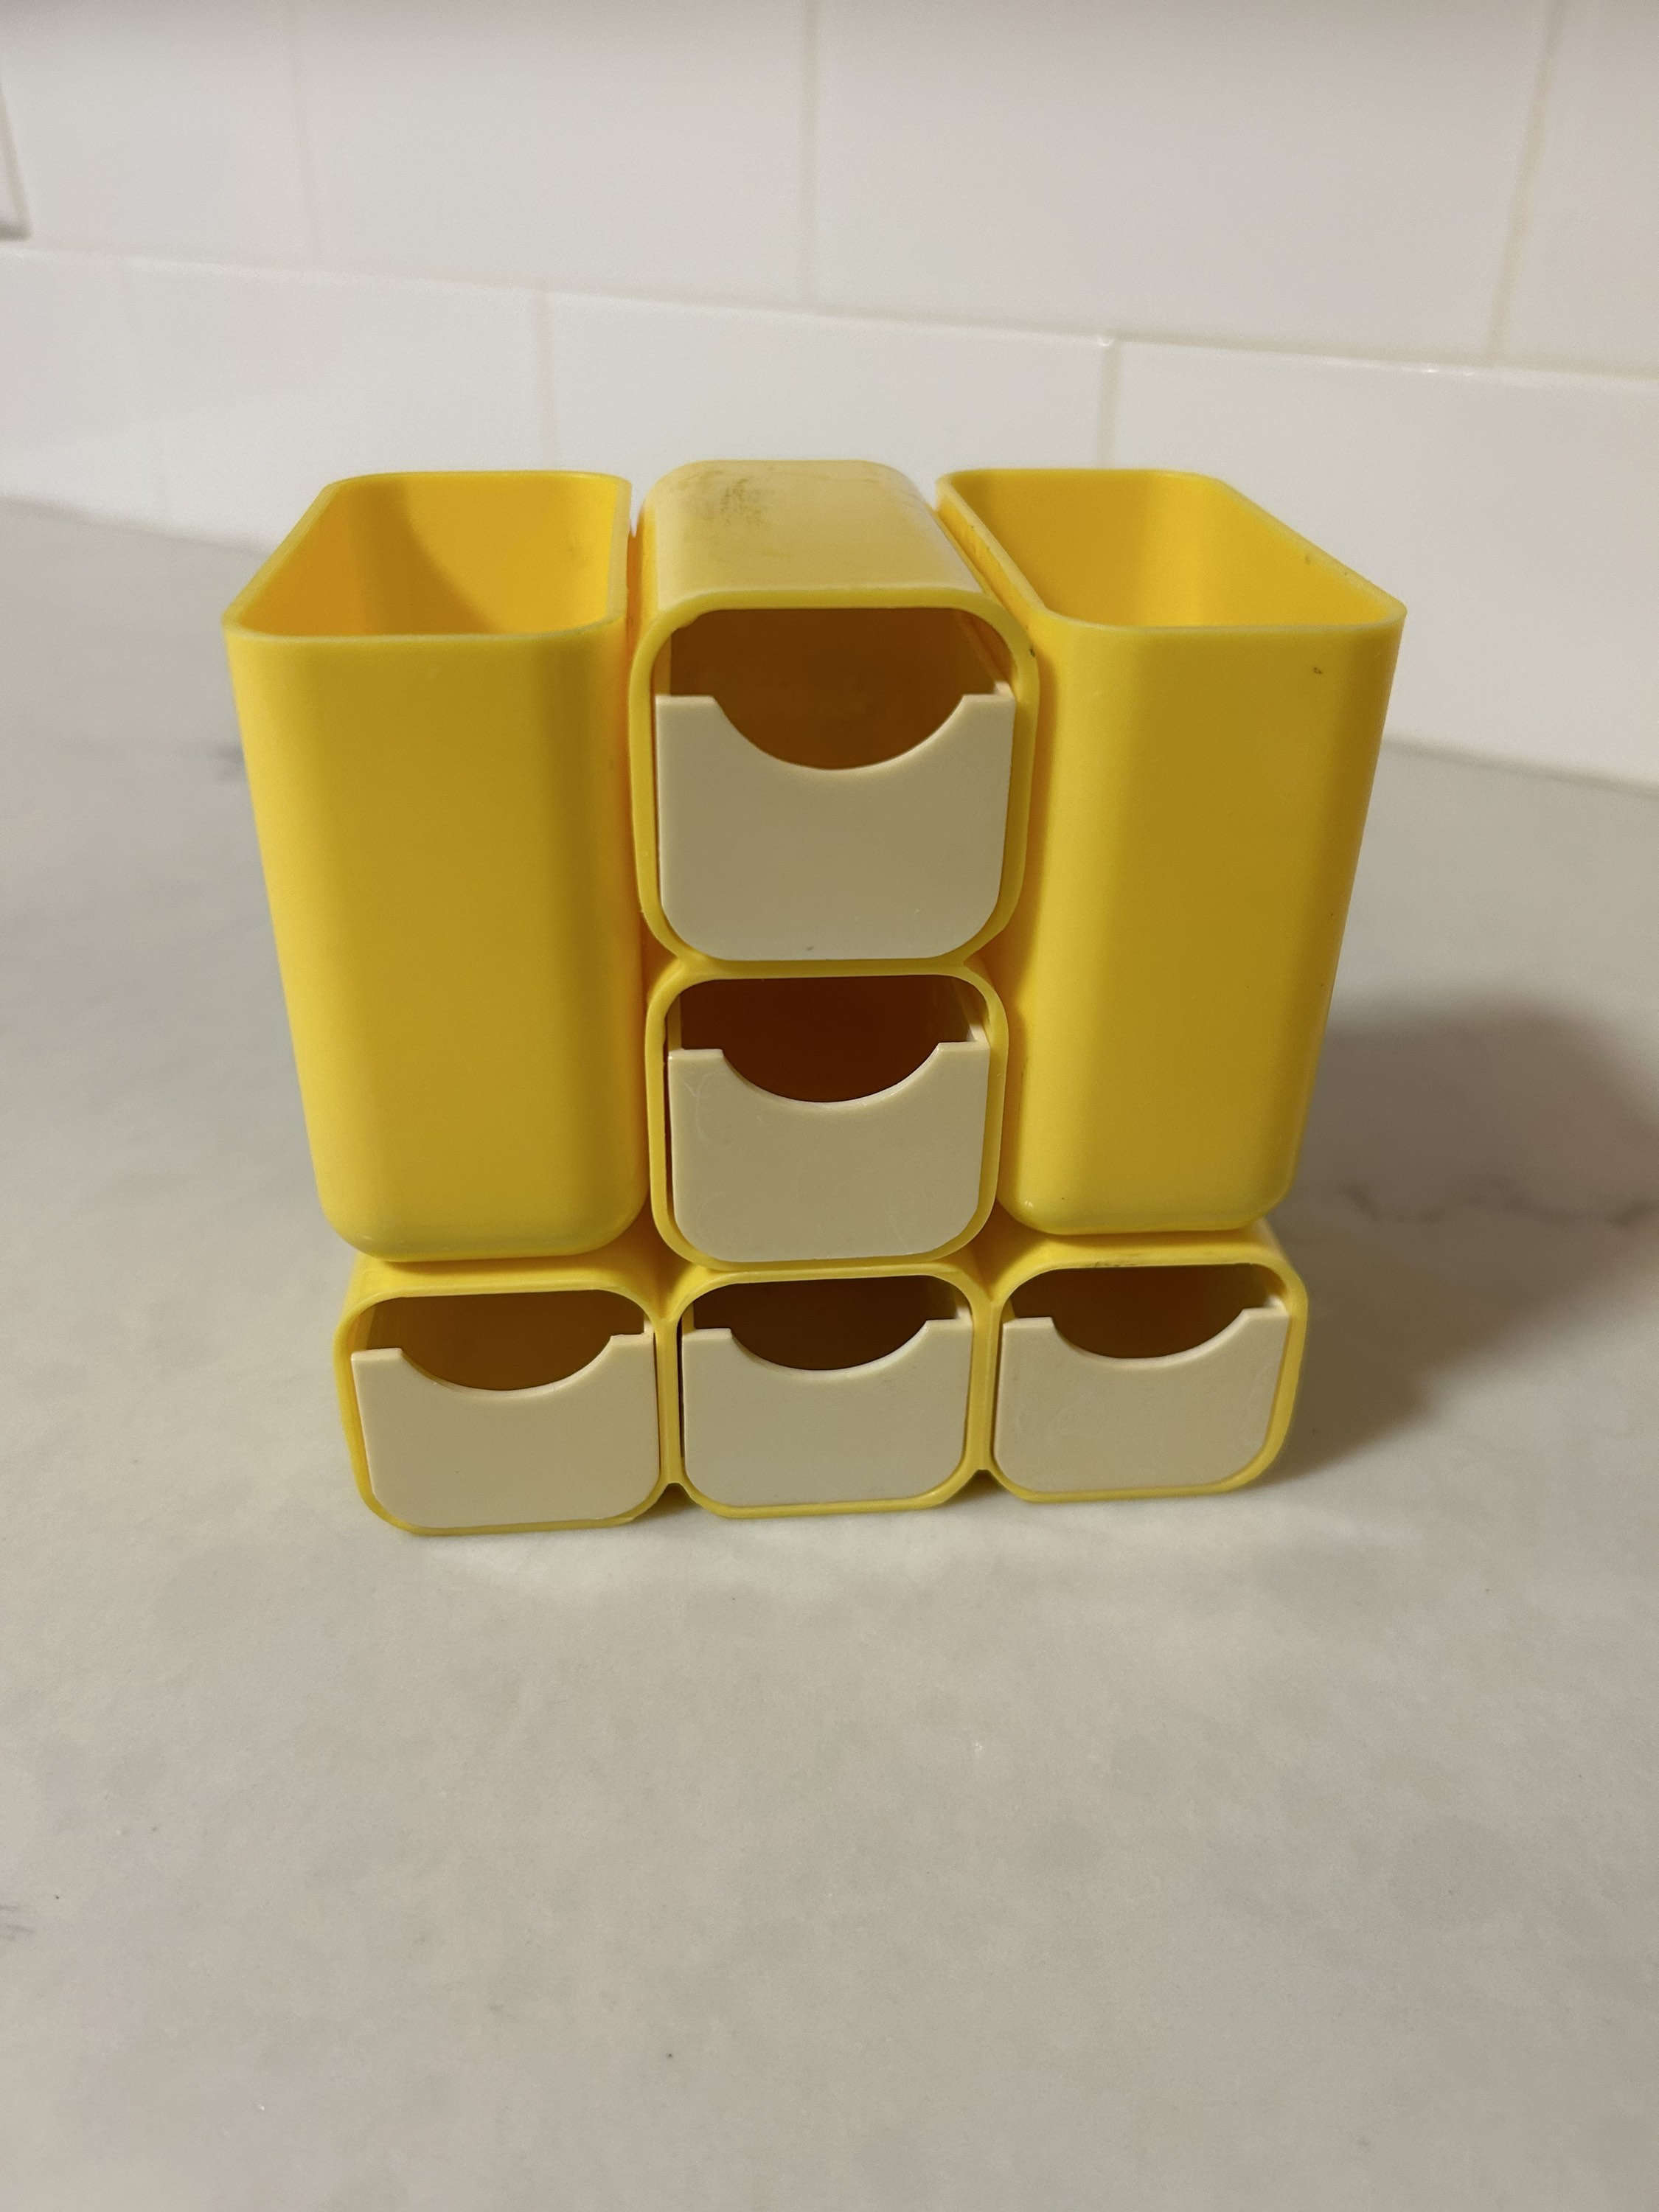 Vintage Stationary Car Desk Decoration Office Supplies Holder Yellow in Box